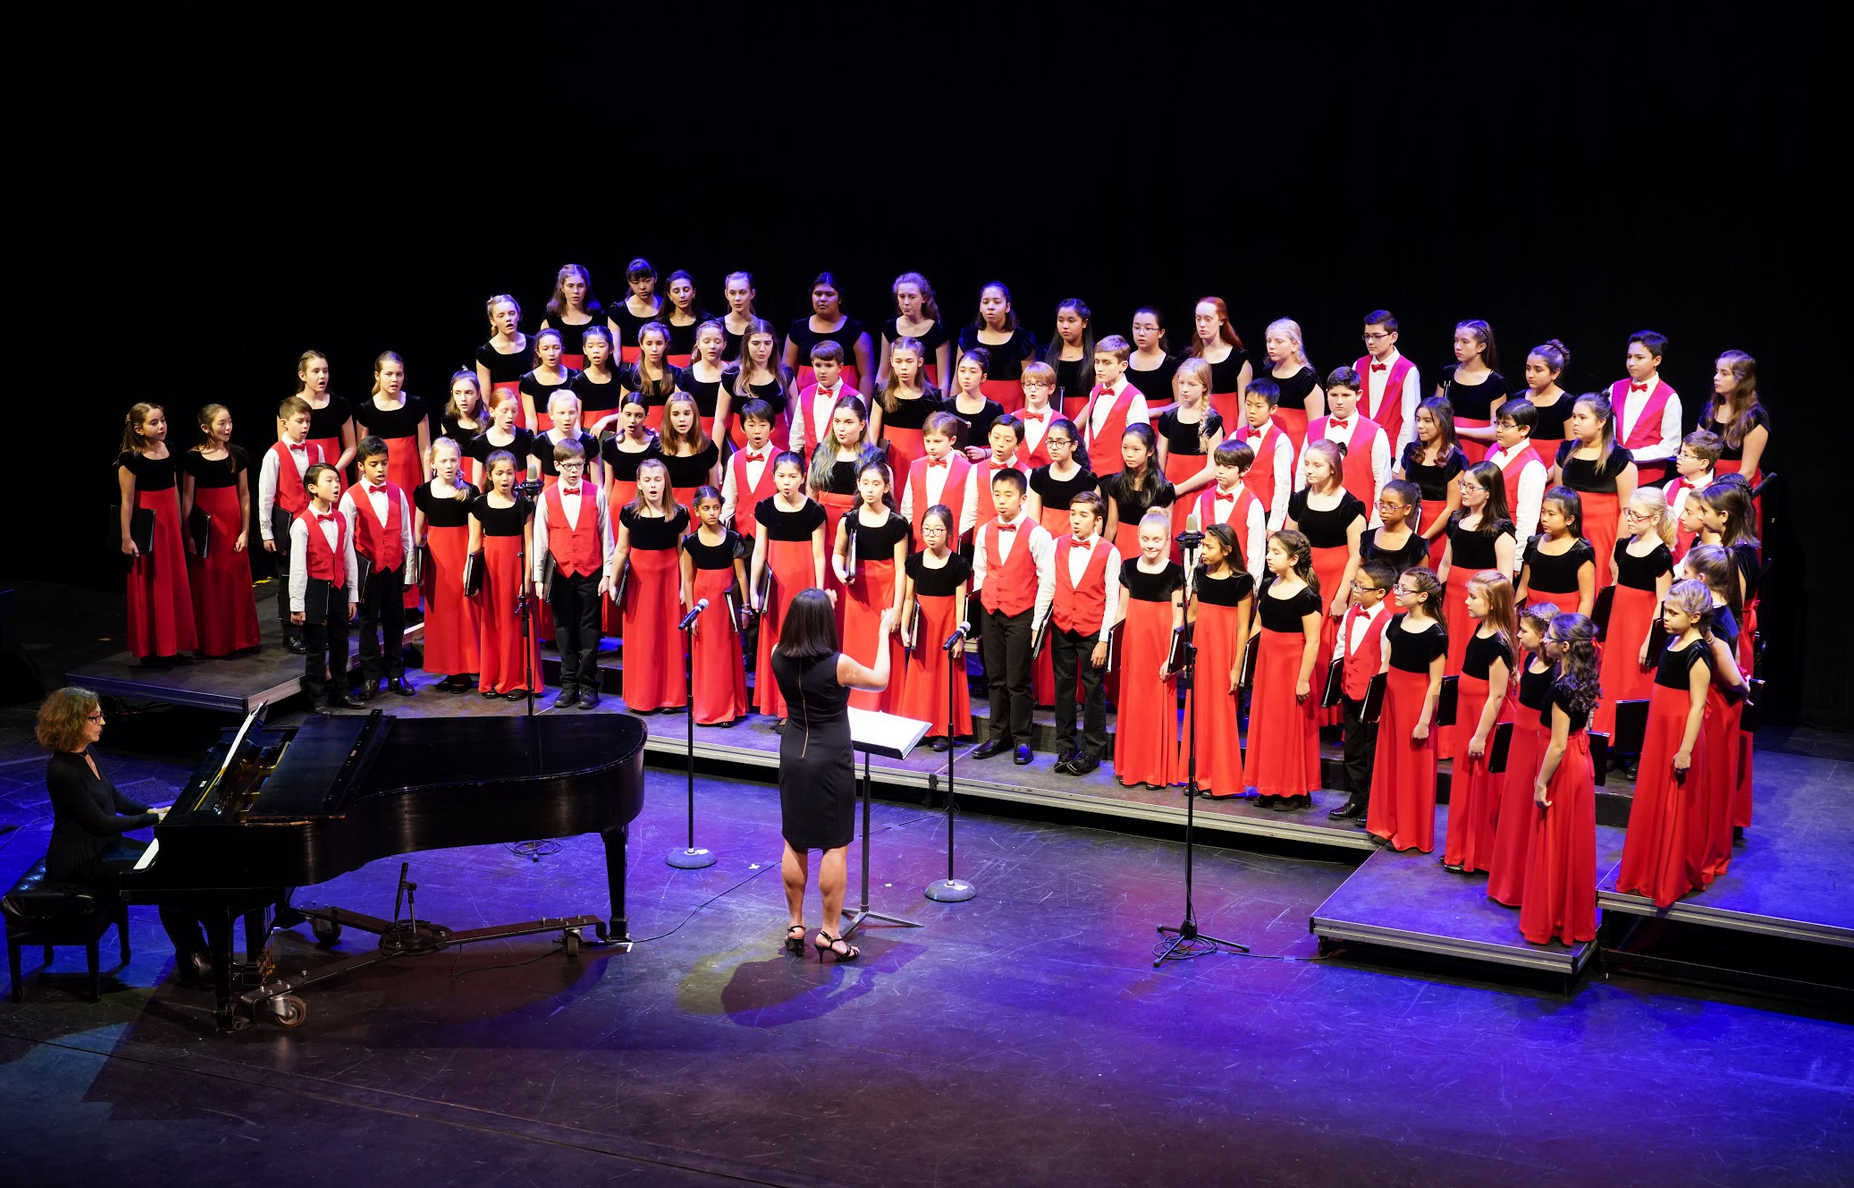 Contributed photo from the Honor Choir's performance at the Palace Theatre in Stamford on Dec 7, 2019